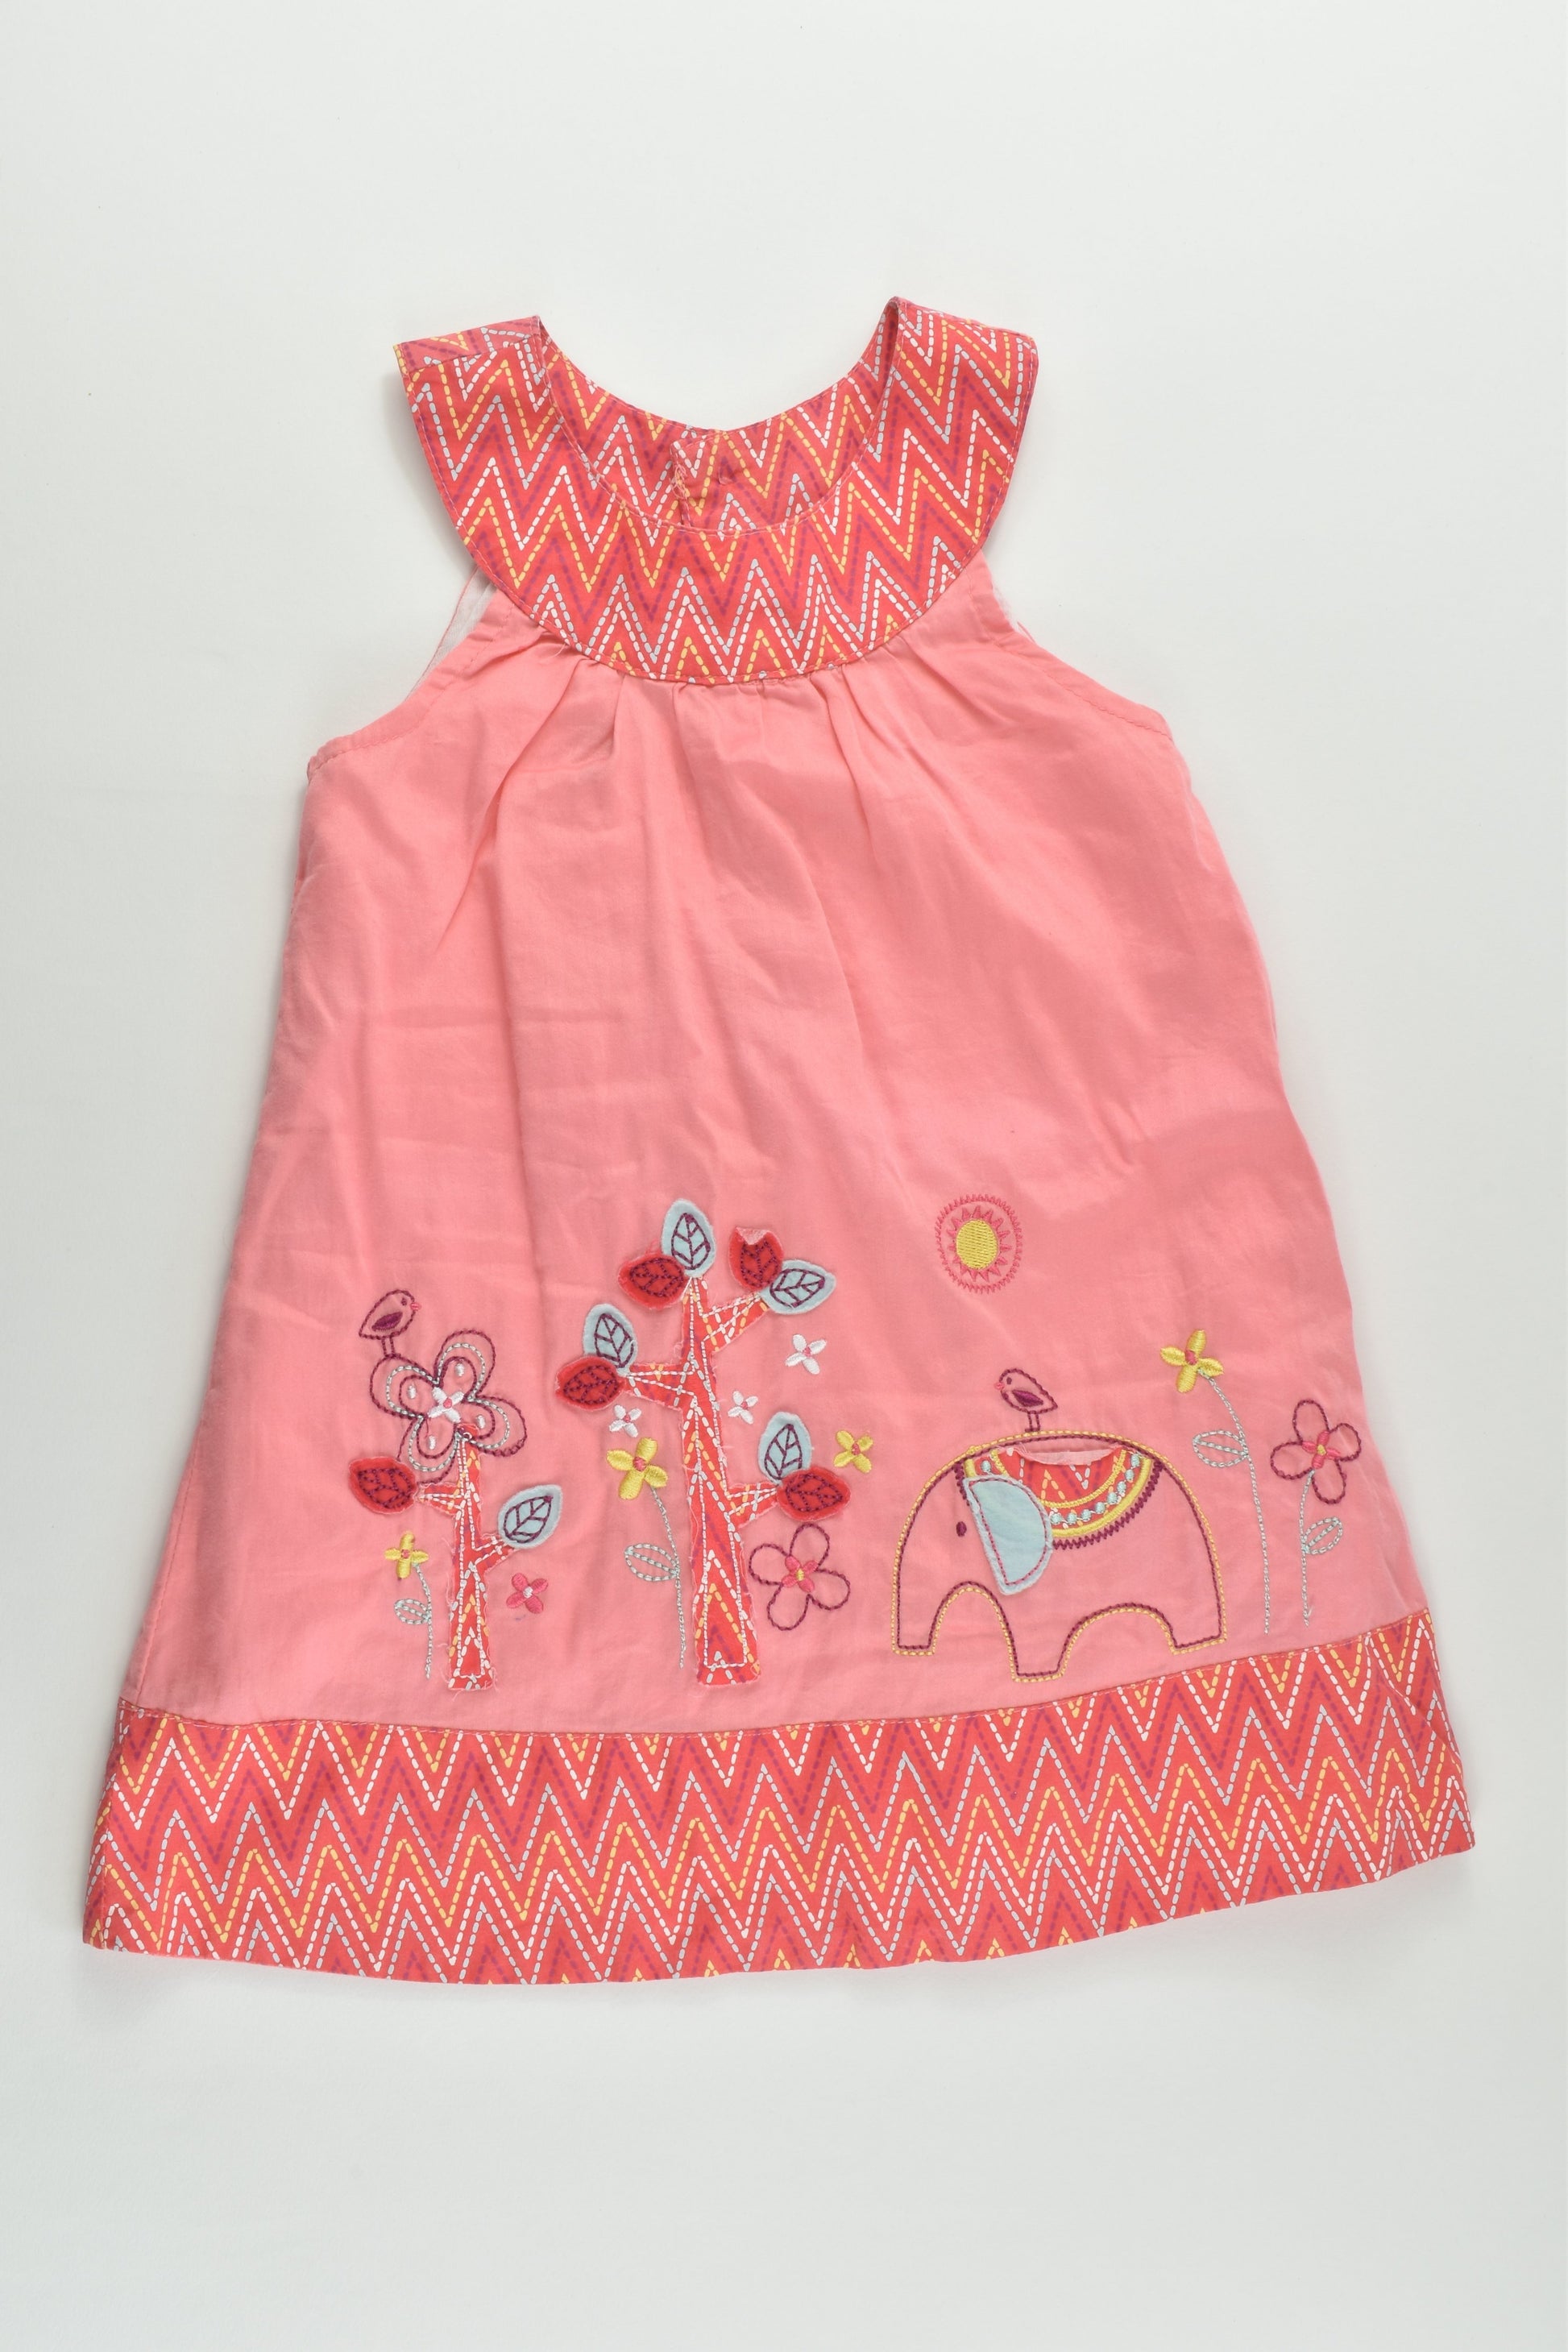 Sprout Size 1 Lined Elephant Dress